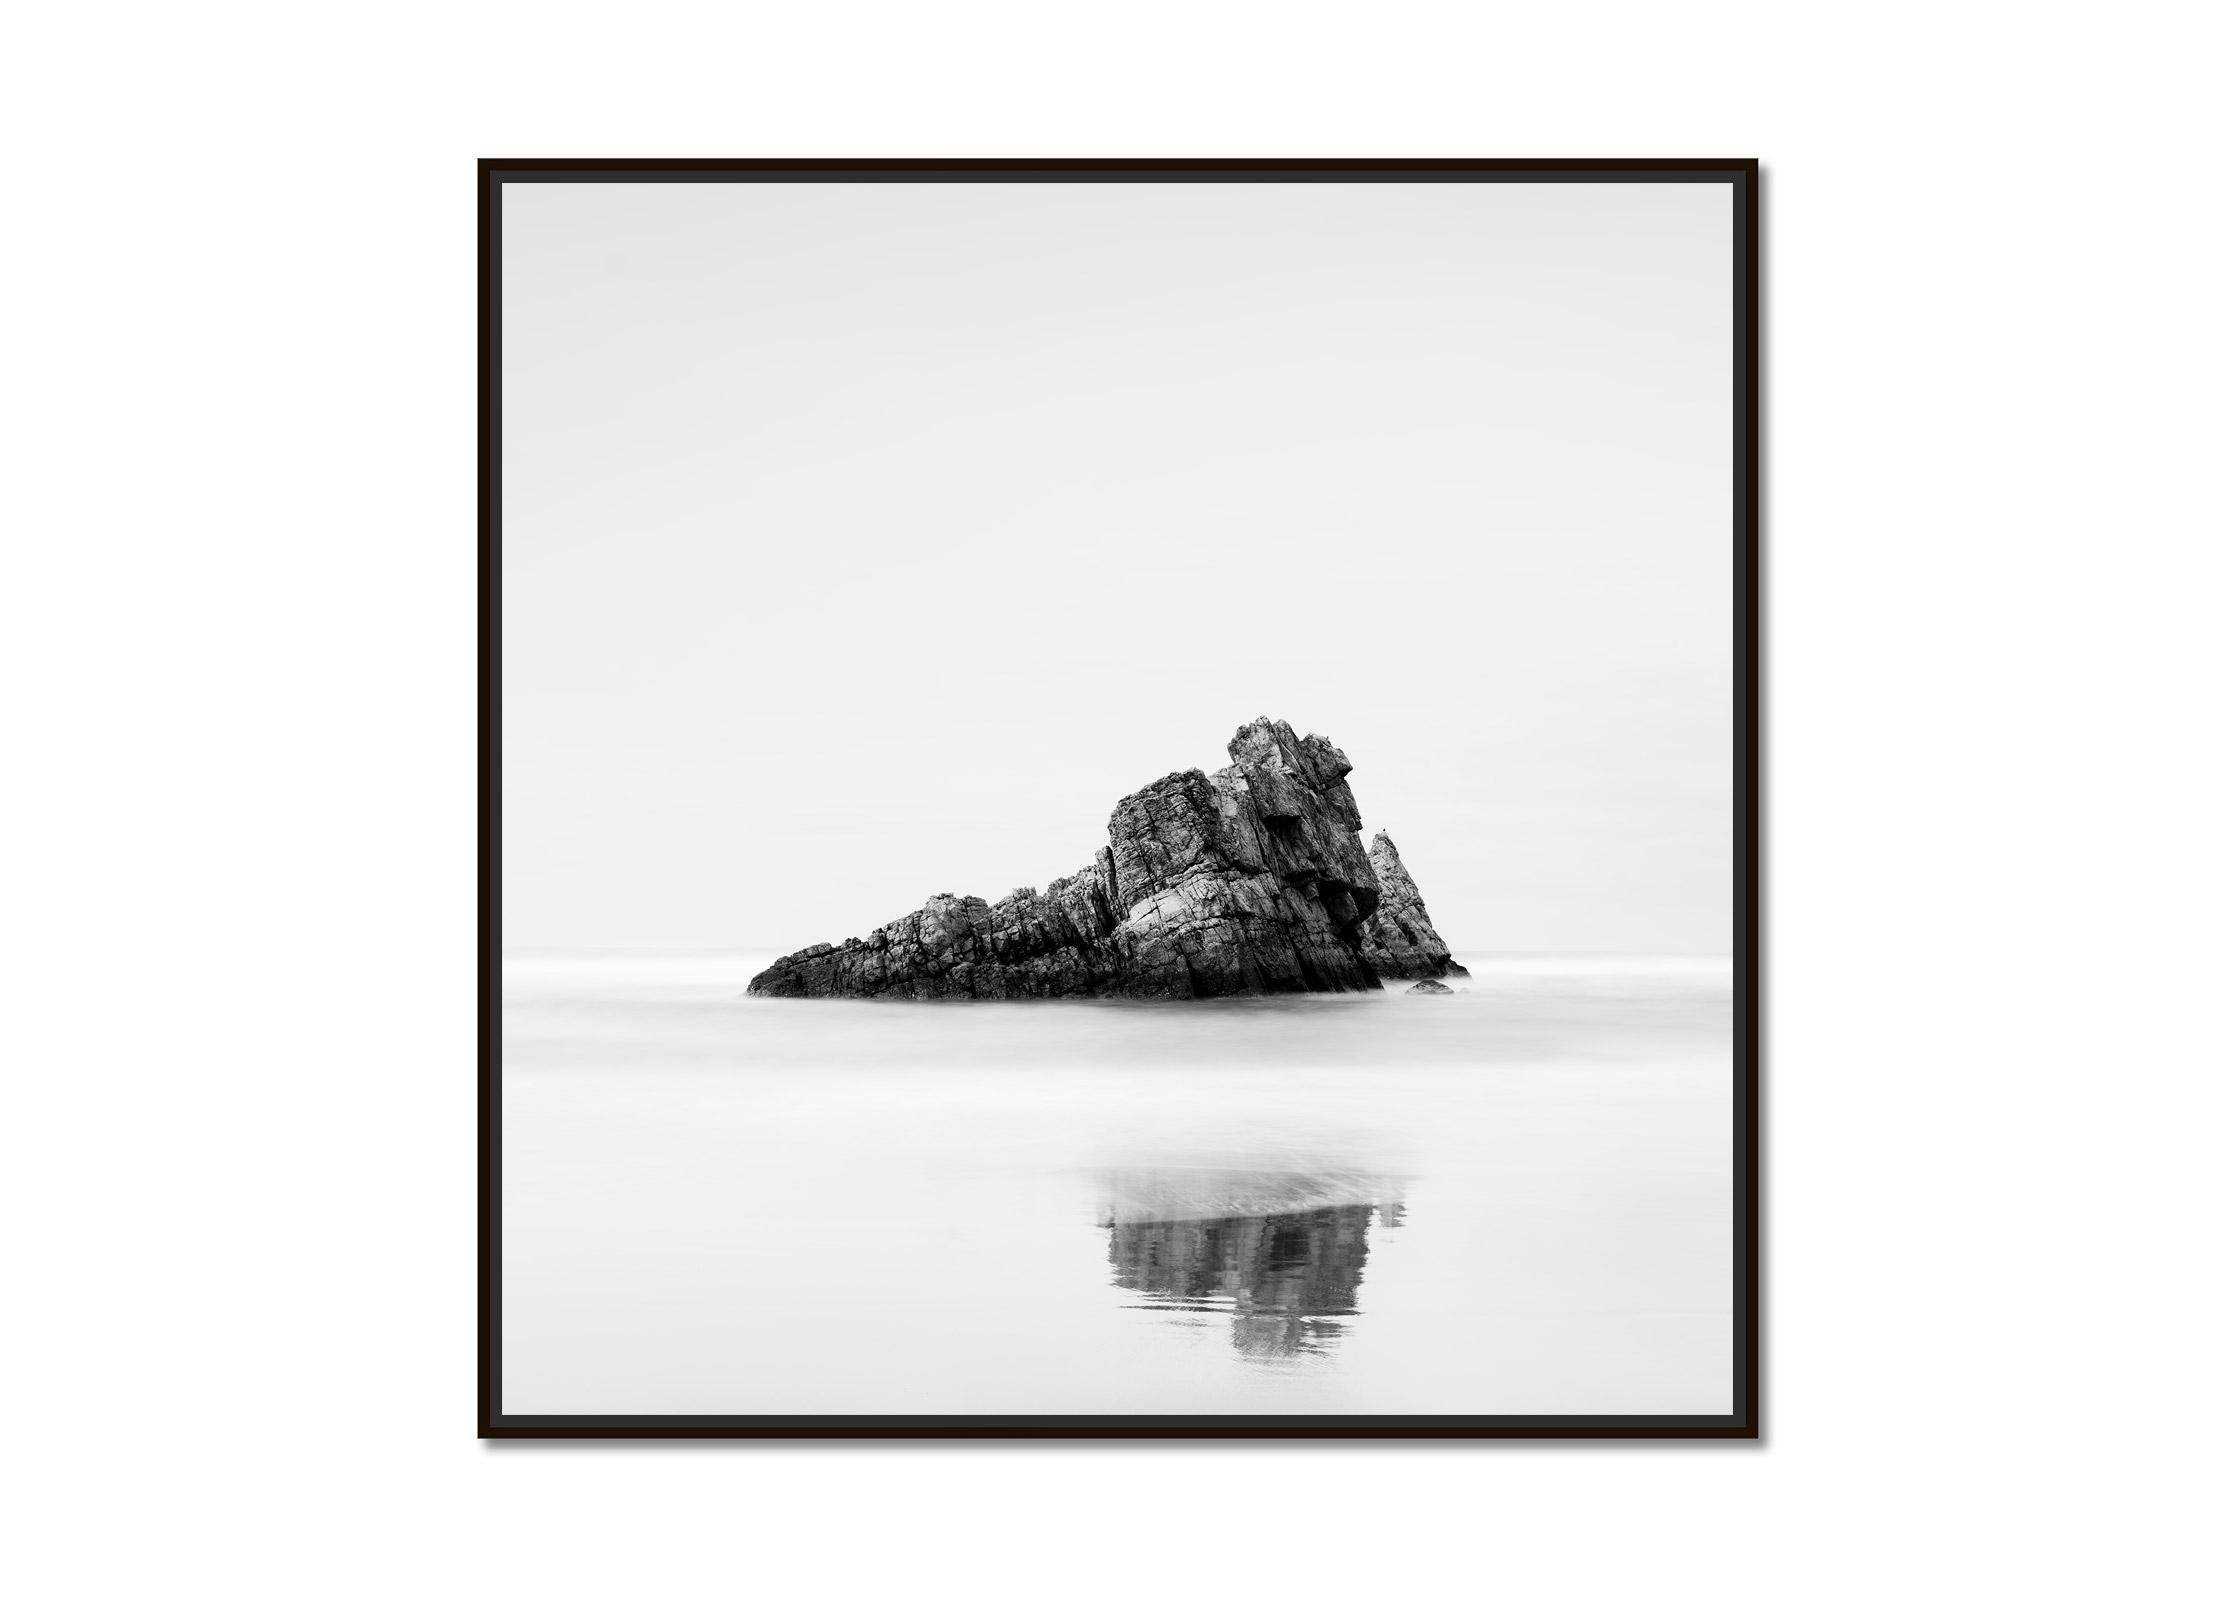 Rock on the Beach, Bay of Biscay, Spain, black and white landscape photography - Photograph by Gerald Berghammer